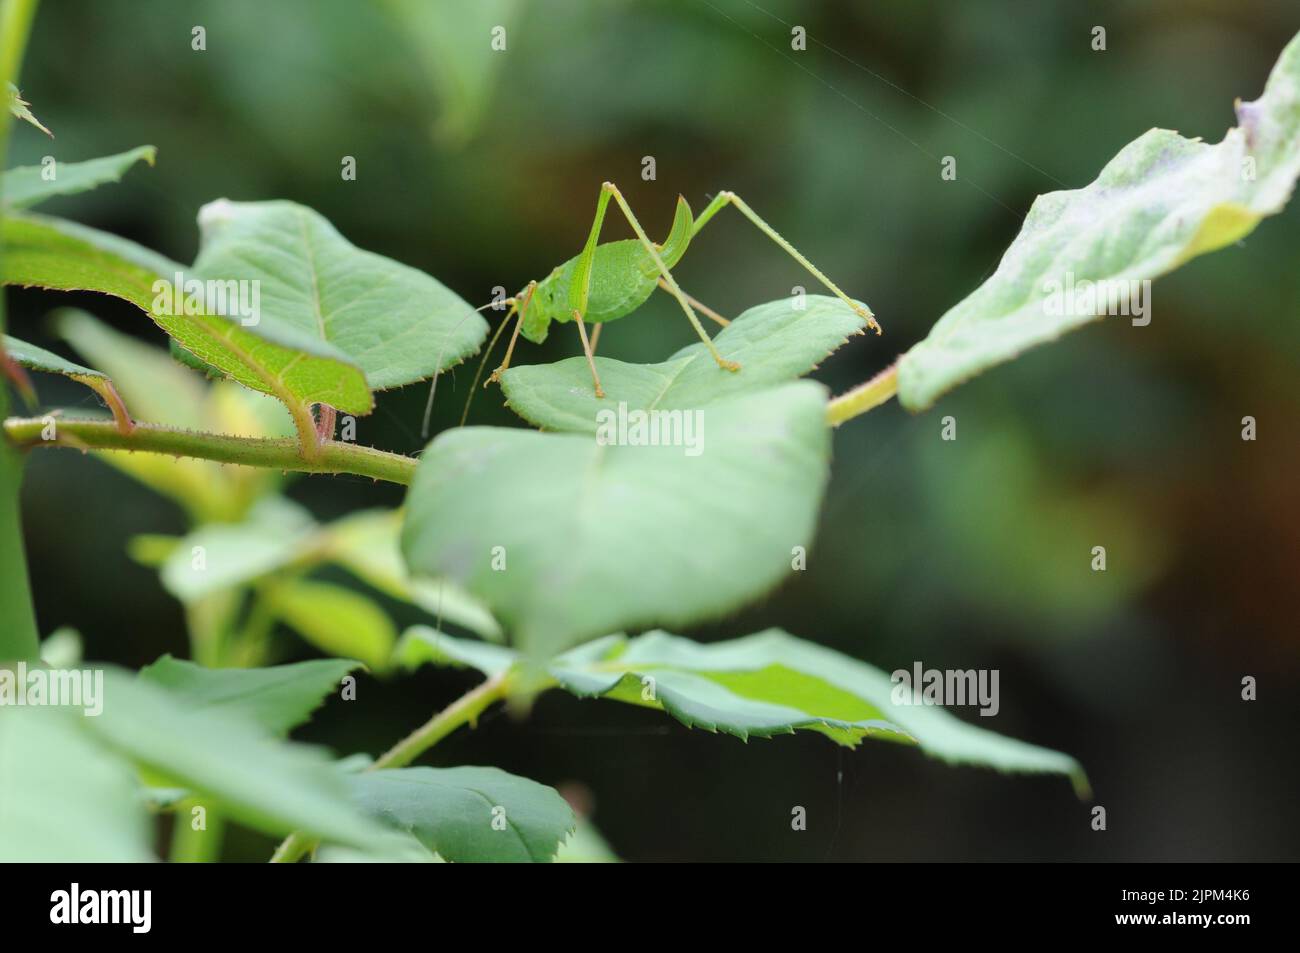 Macro photo of a Green Cricket. Bright Green Colour Insect. Jumping Insect. Stock Photo